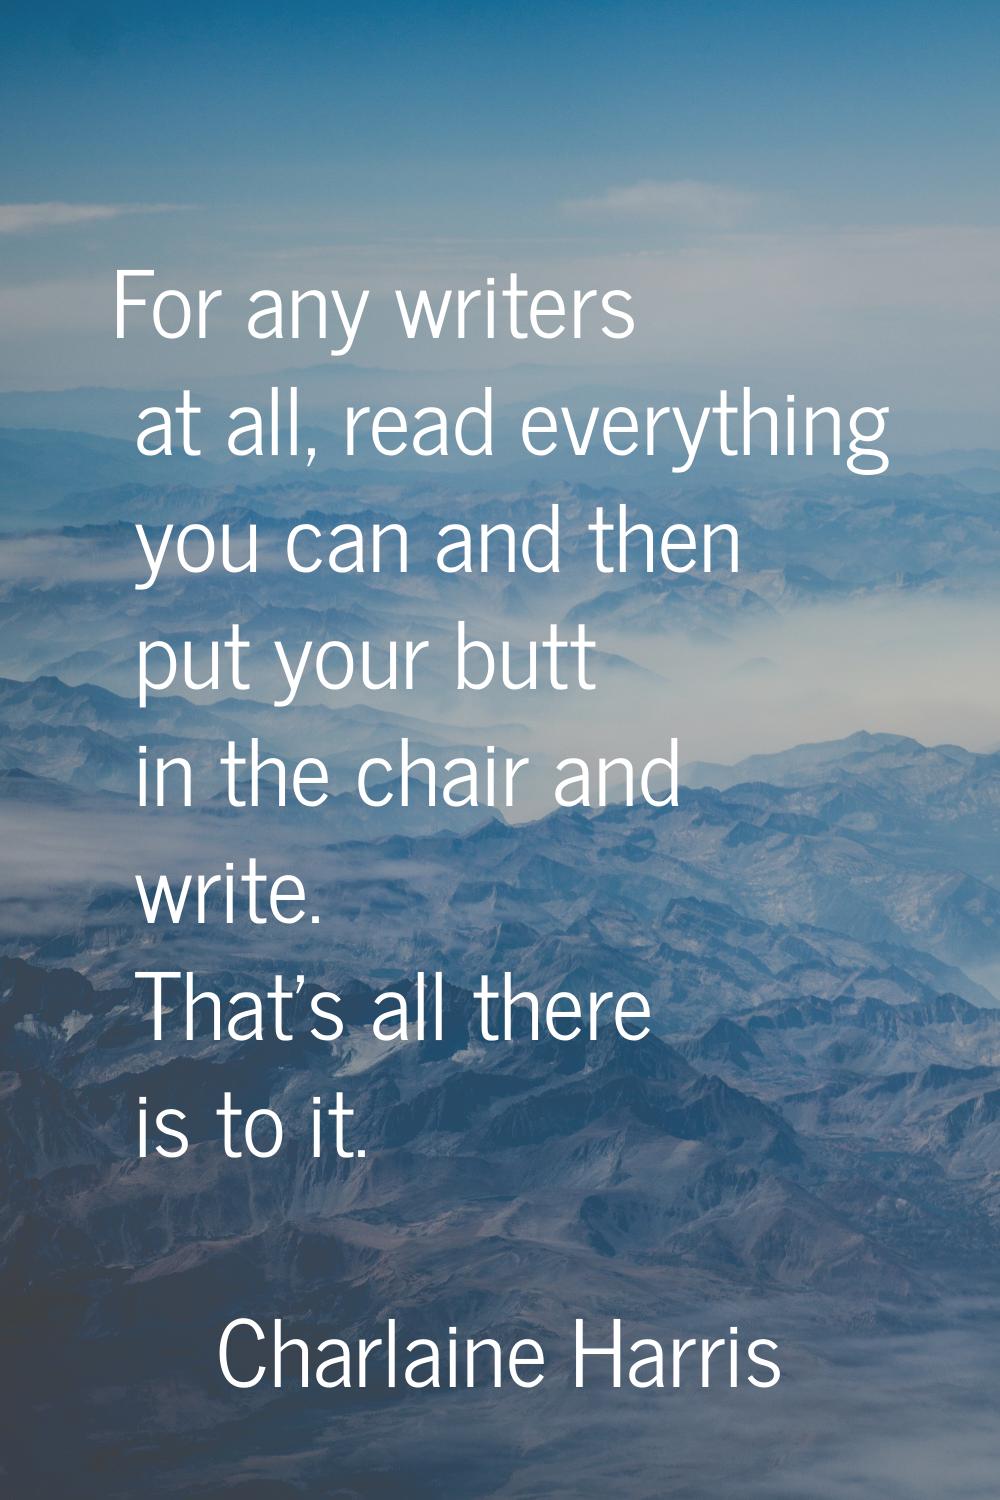 For any writers at all, read everything you can and then put your butt in the chair and write. That